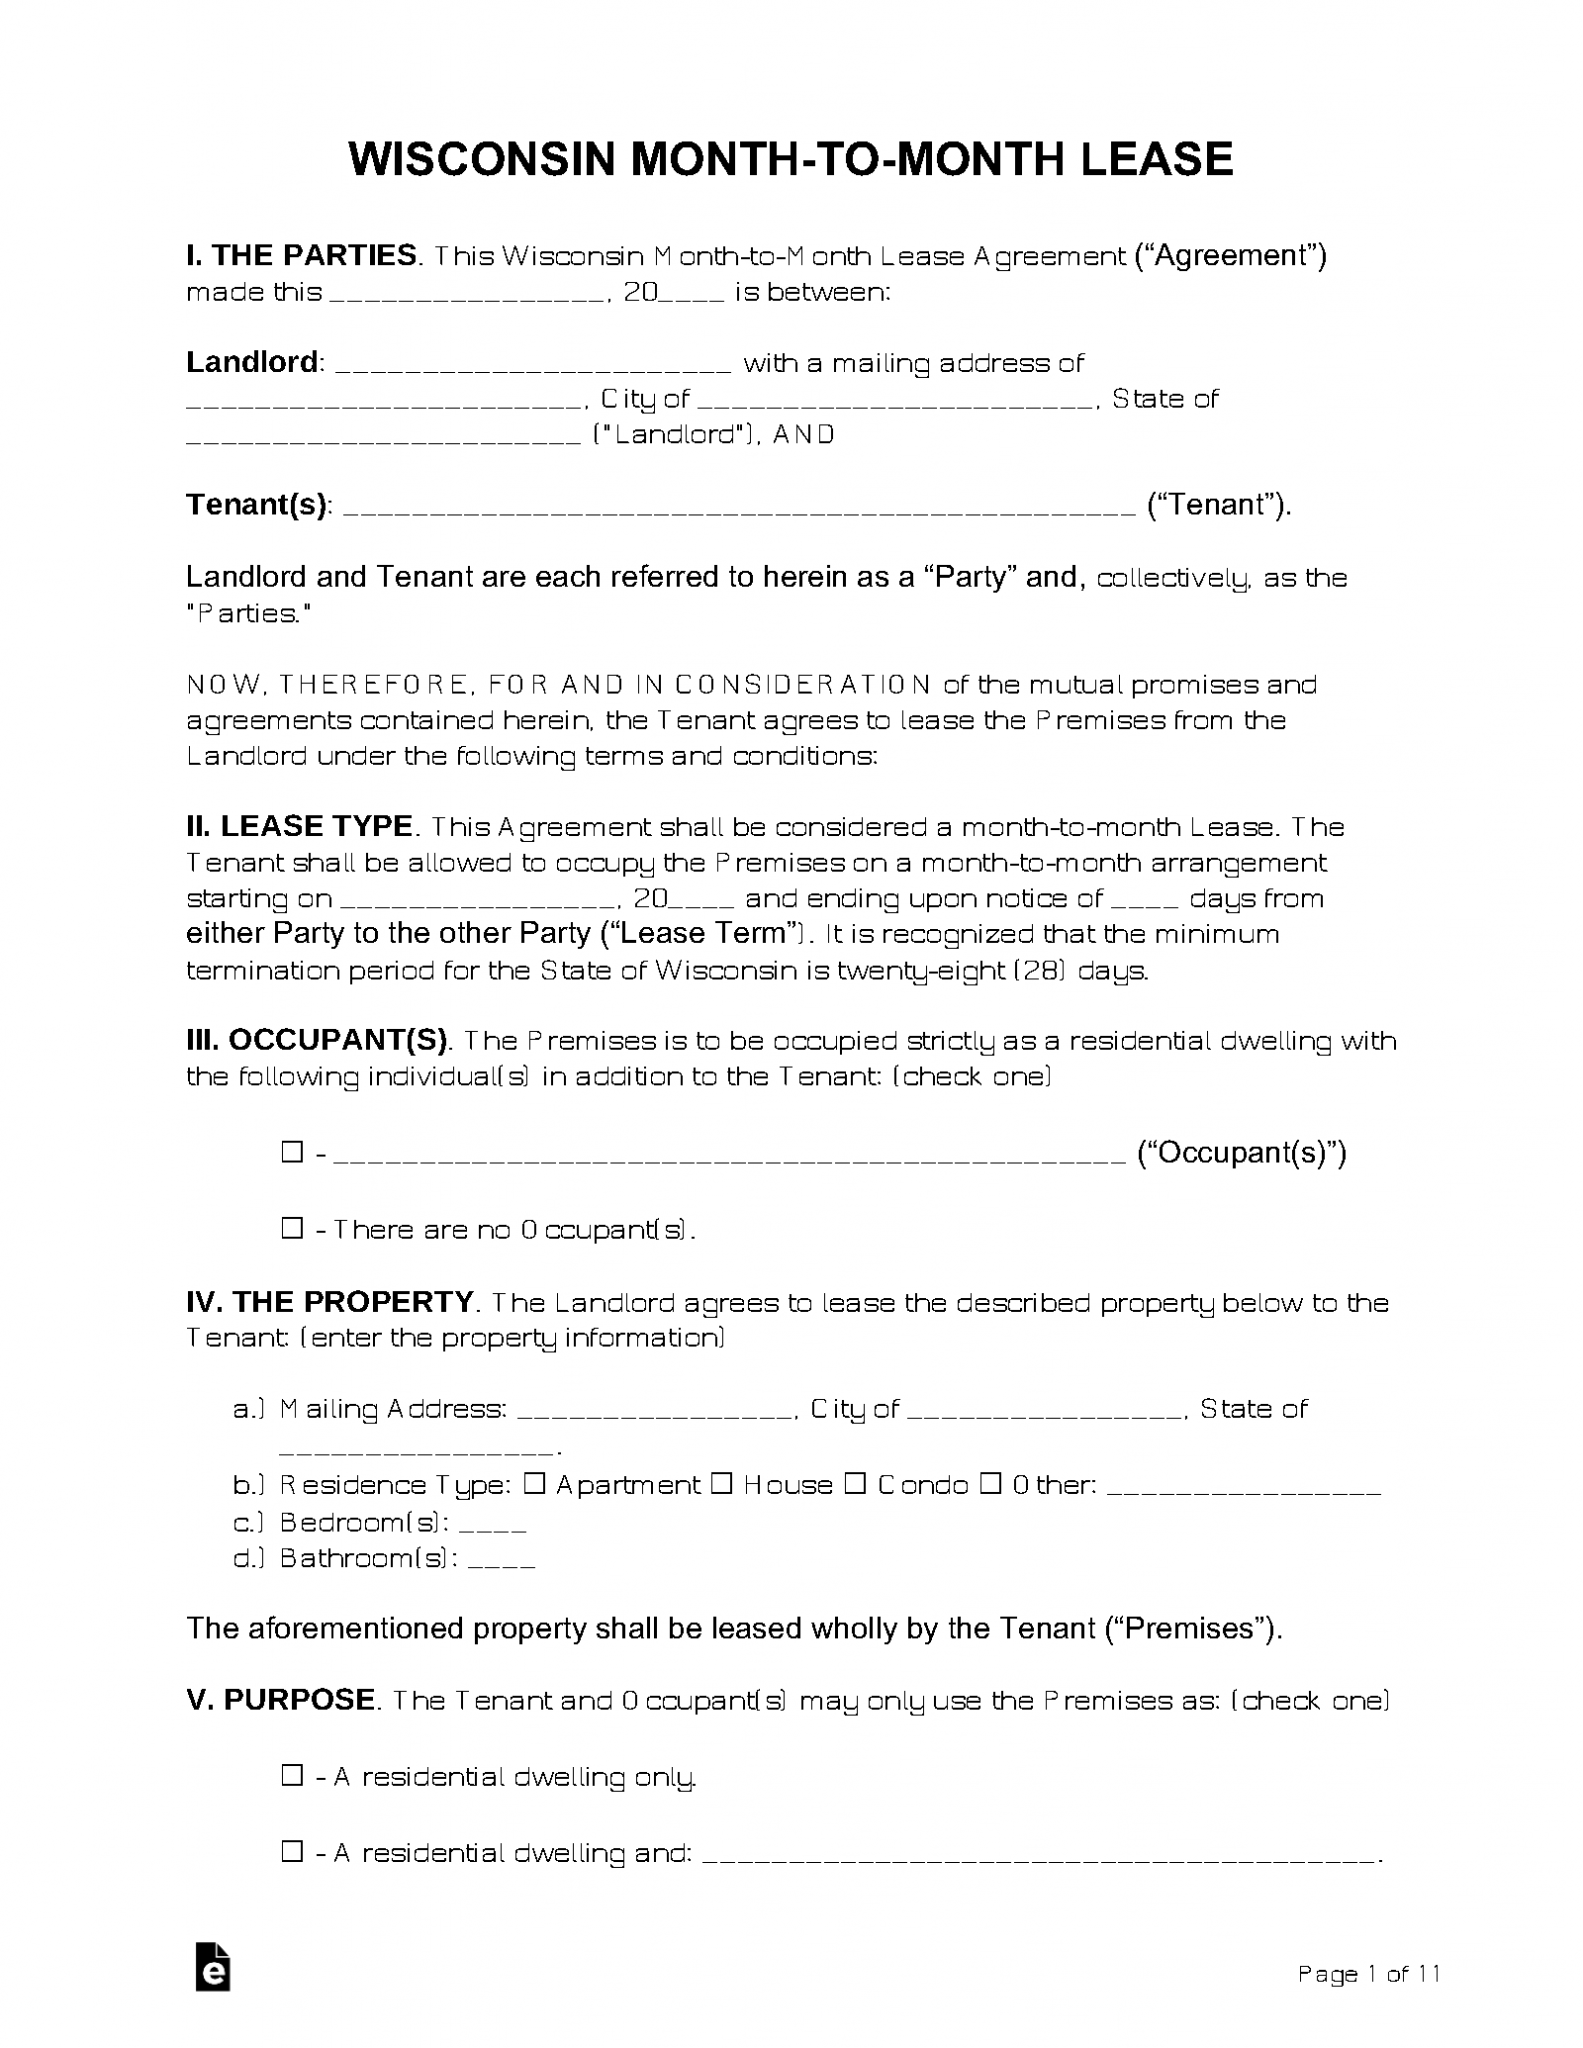 free-wisconsin-month-to-month-rental-agreement-pdf-word-eforms